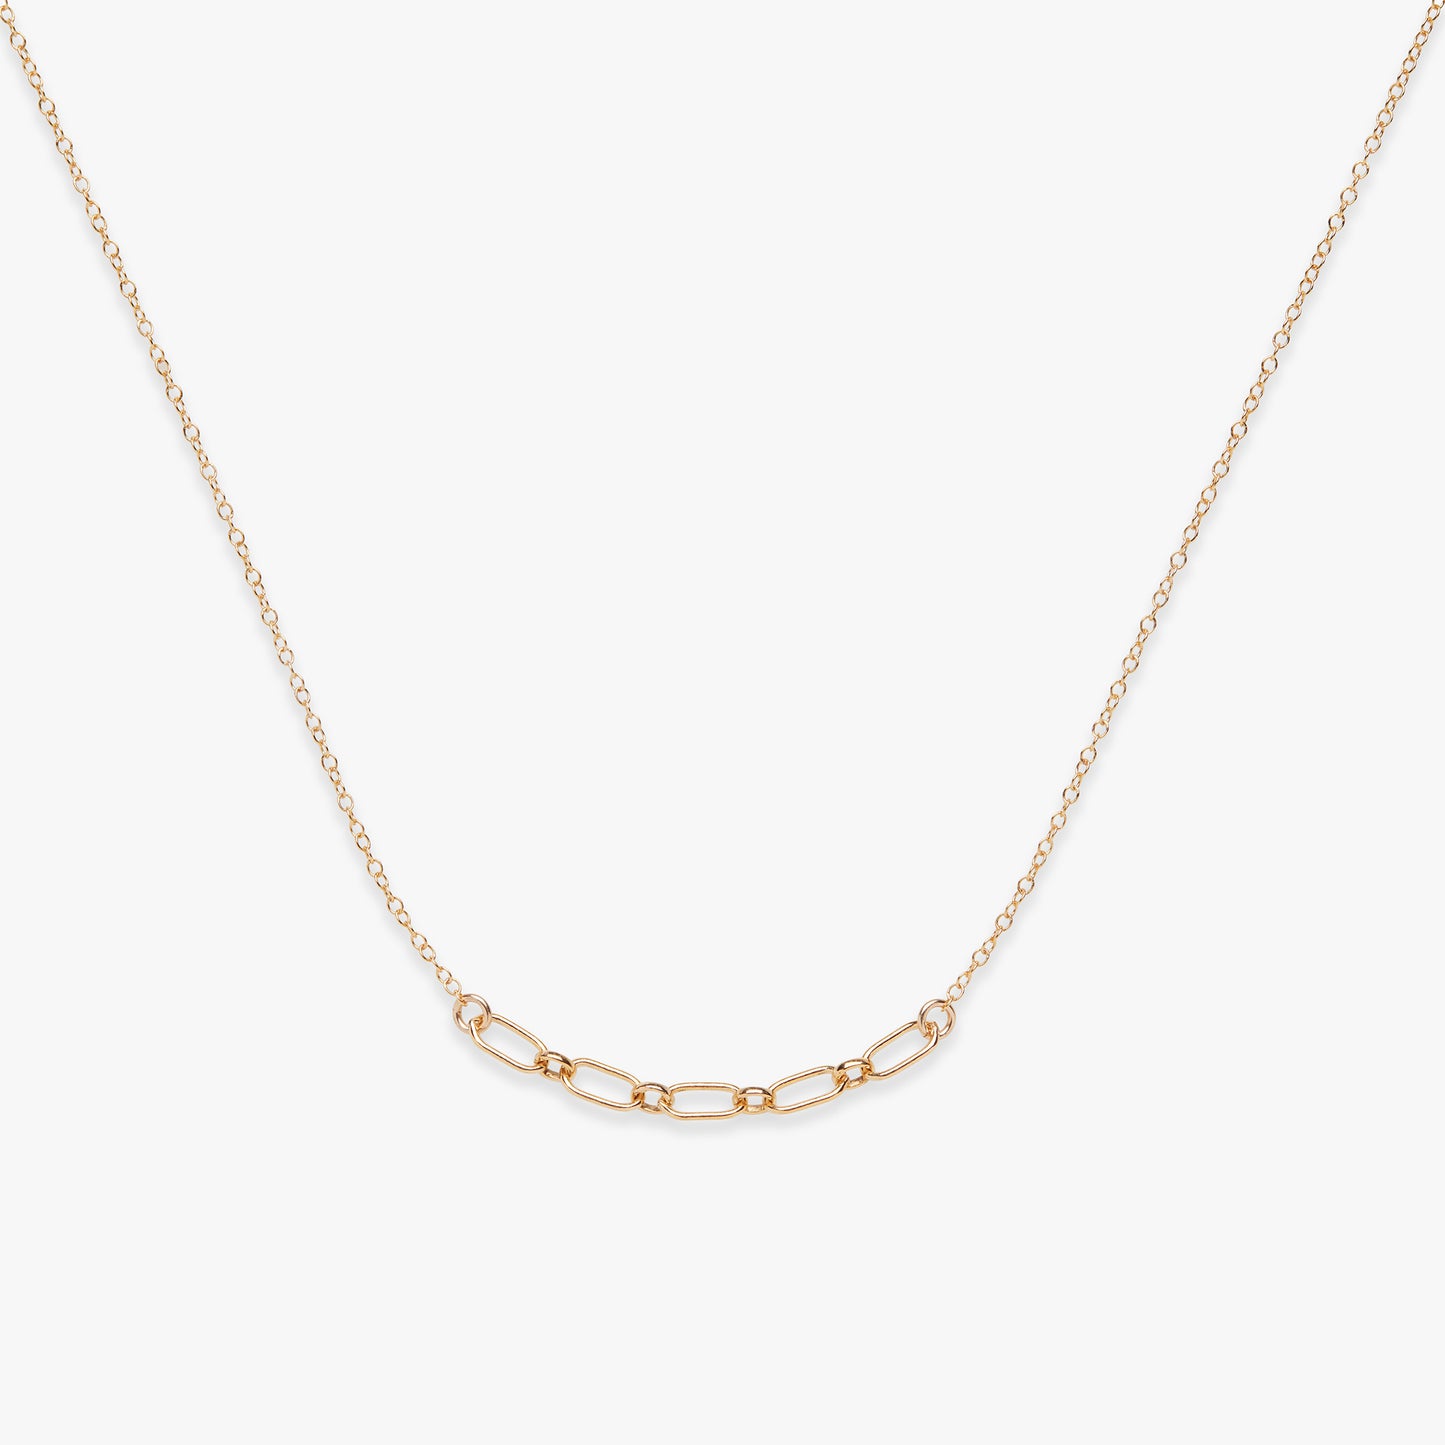 Oval links chain necklace gold filled